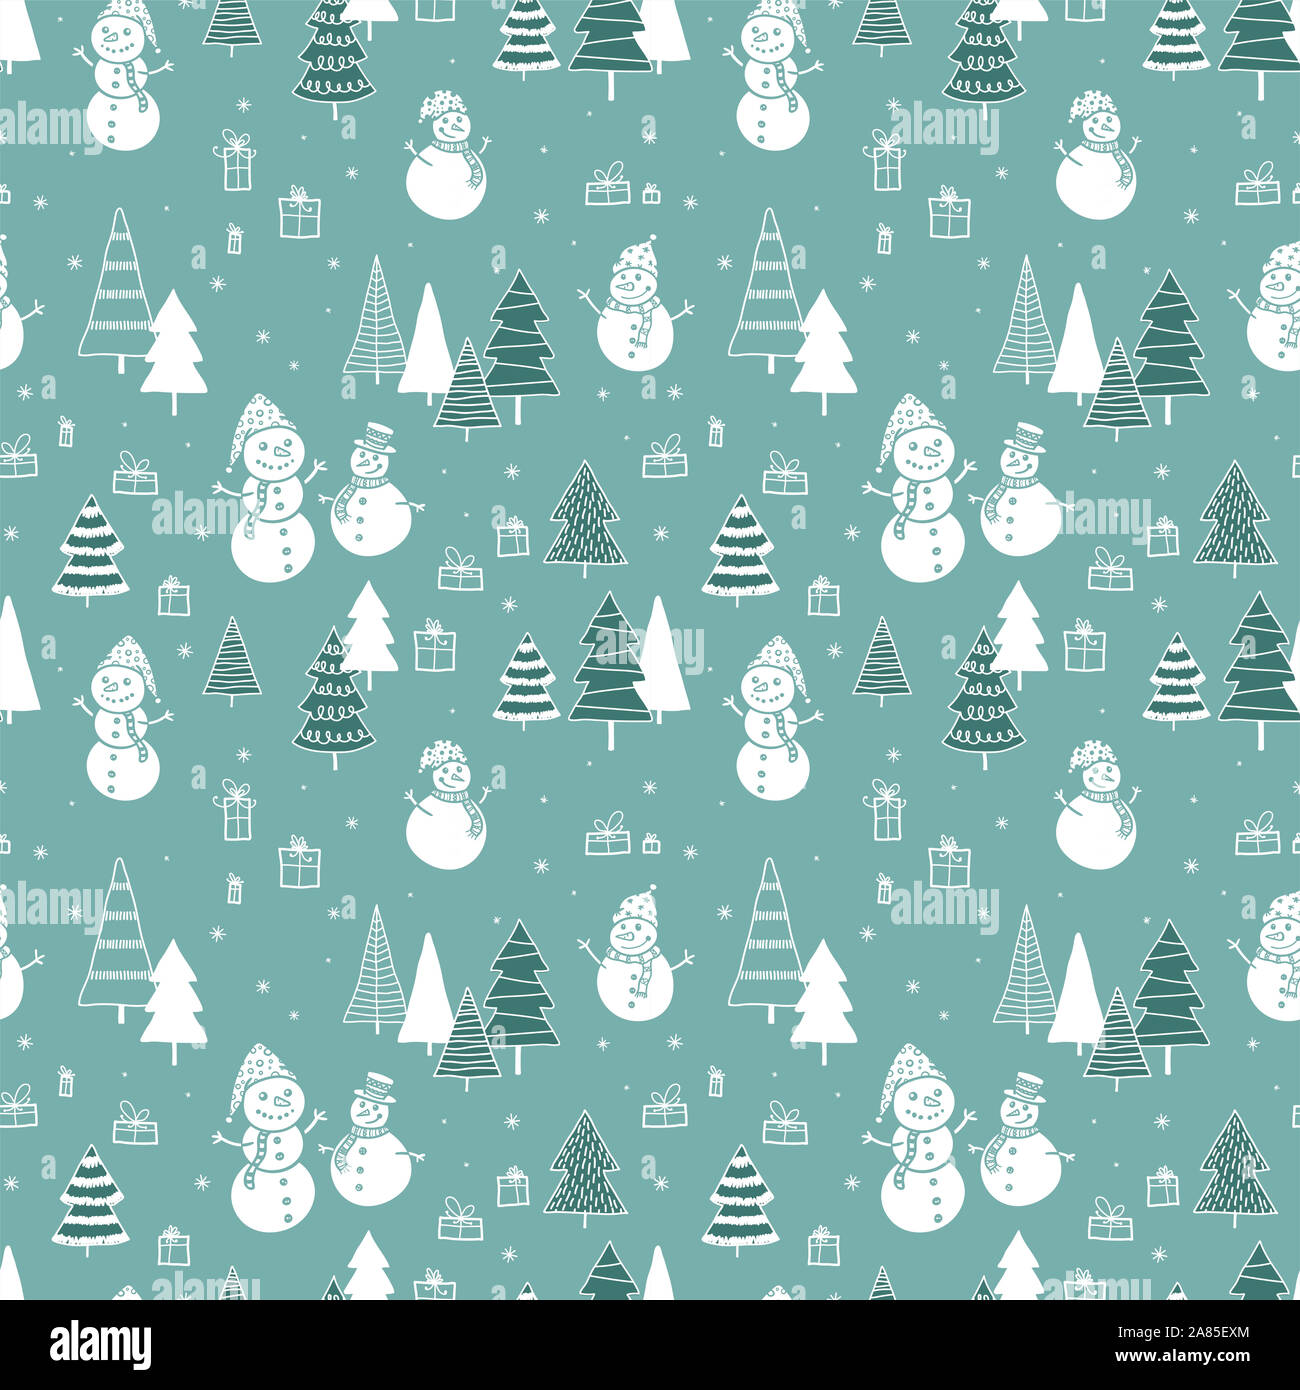 Fun and cute hand drawn snow mans seamless pattern winter themed